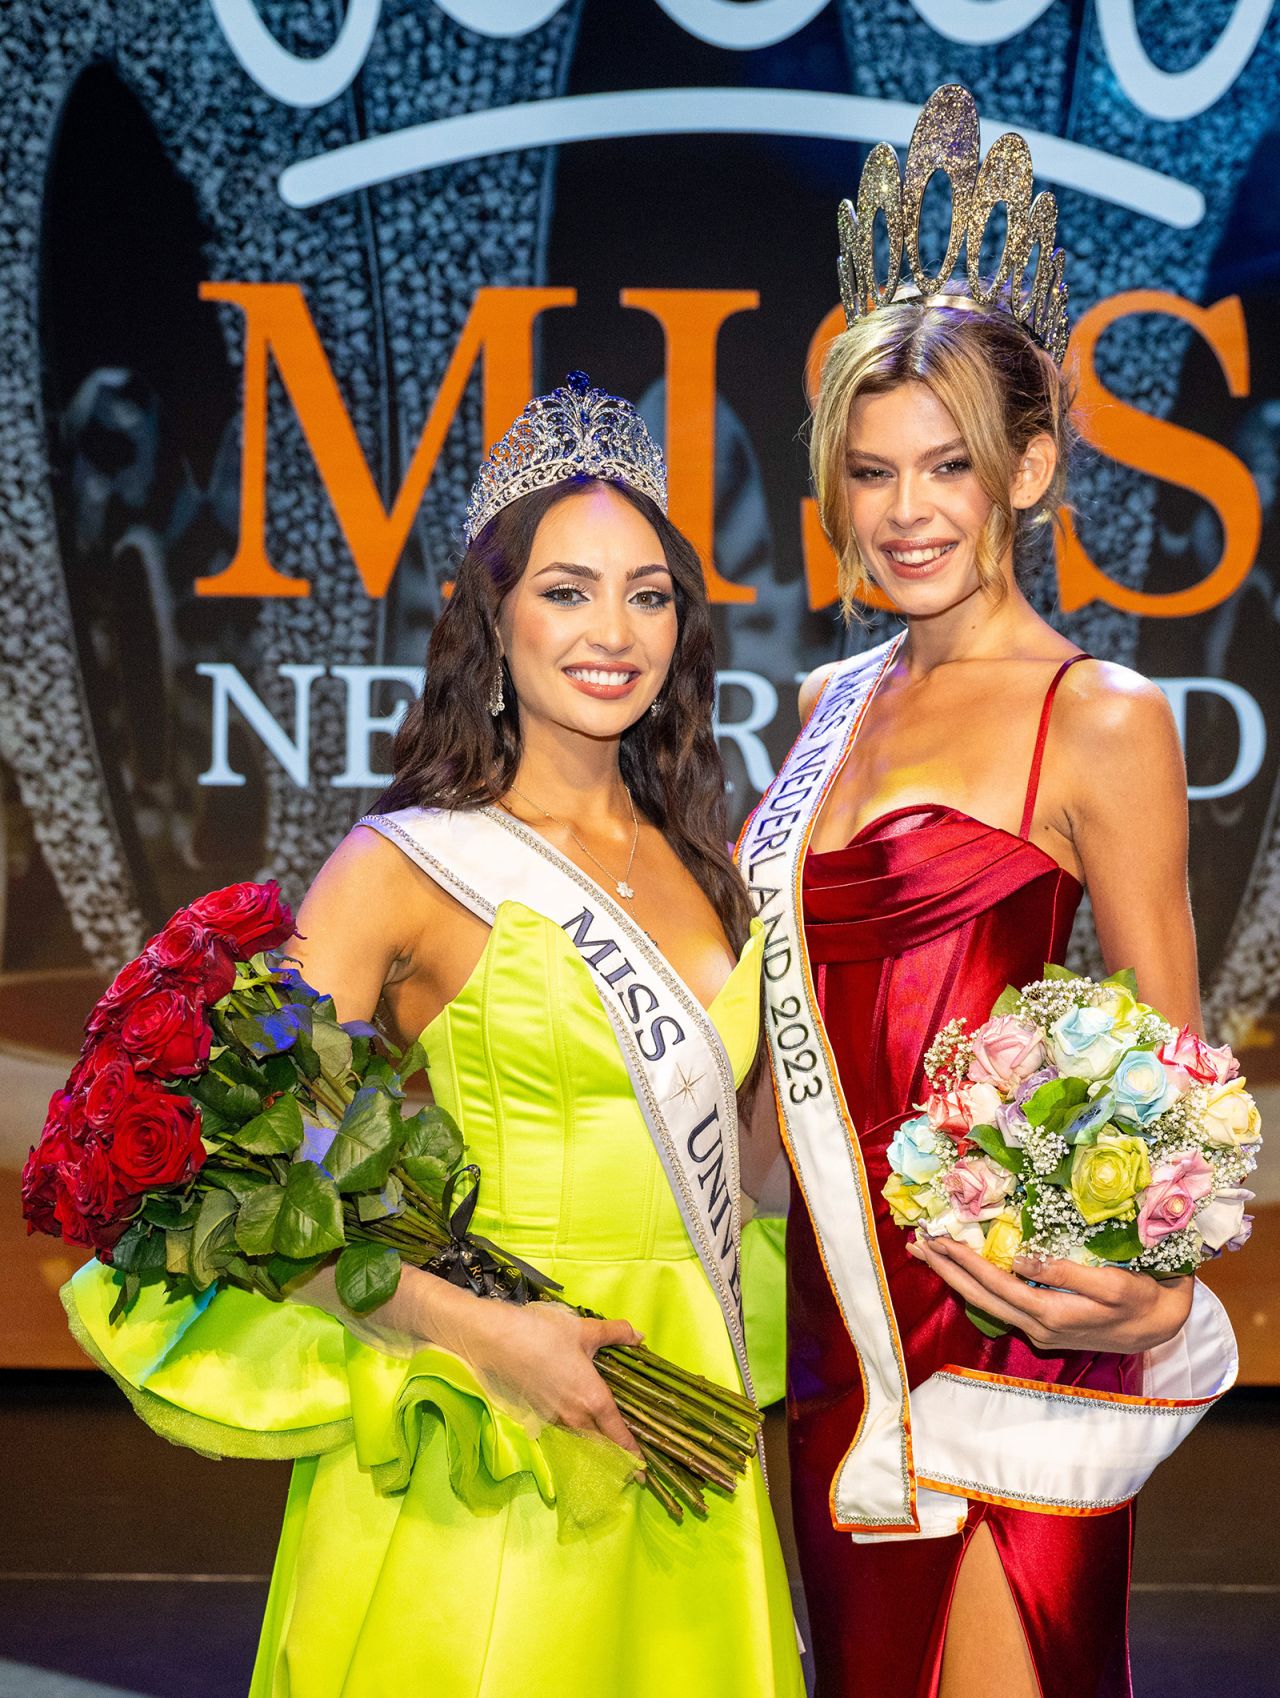 Miss Netherlands contestant makes history as first trans woman to win